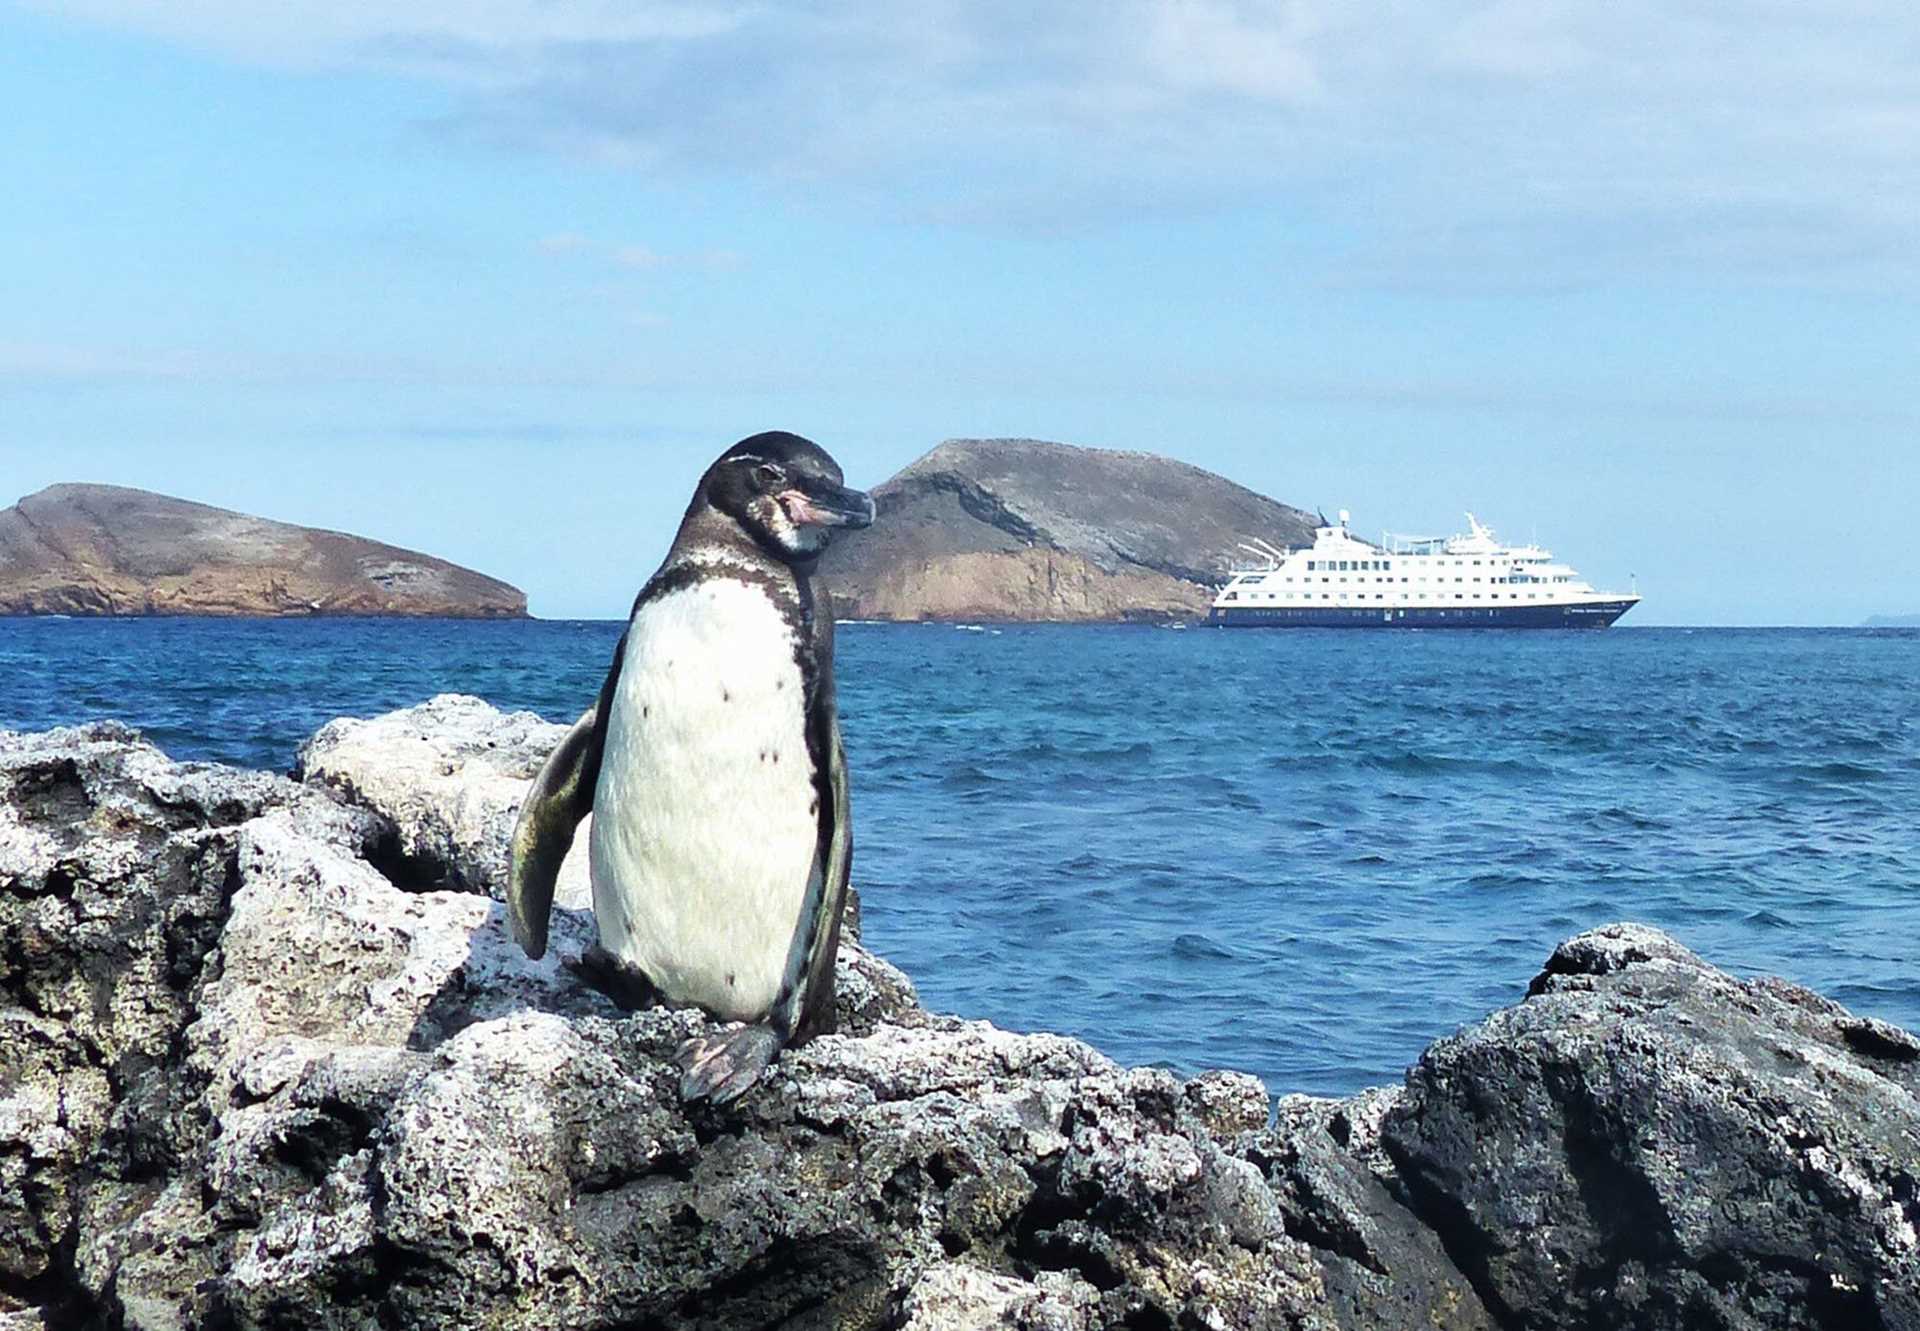 Galapagos penguin with ship in background